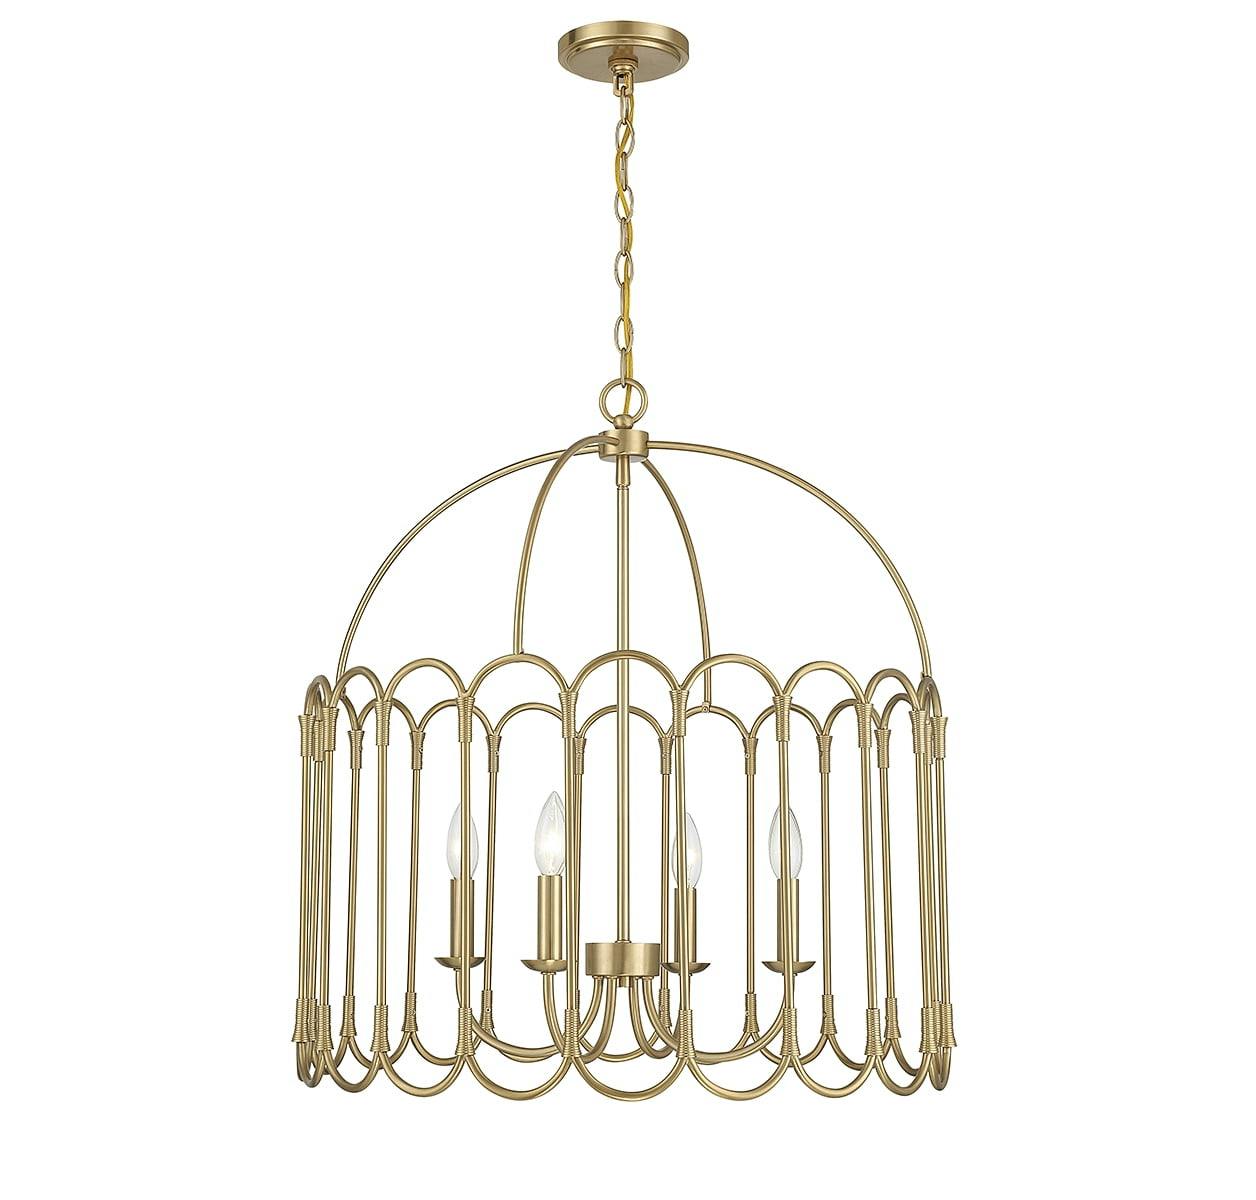 Savoy Meridian Contemporary 4-Light Drum Pendant in Polished Nickel